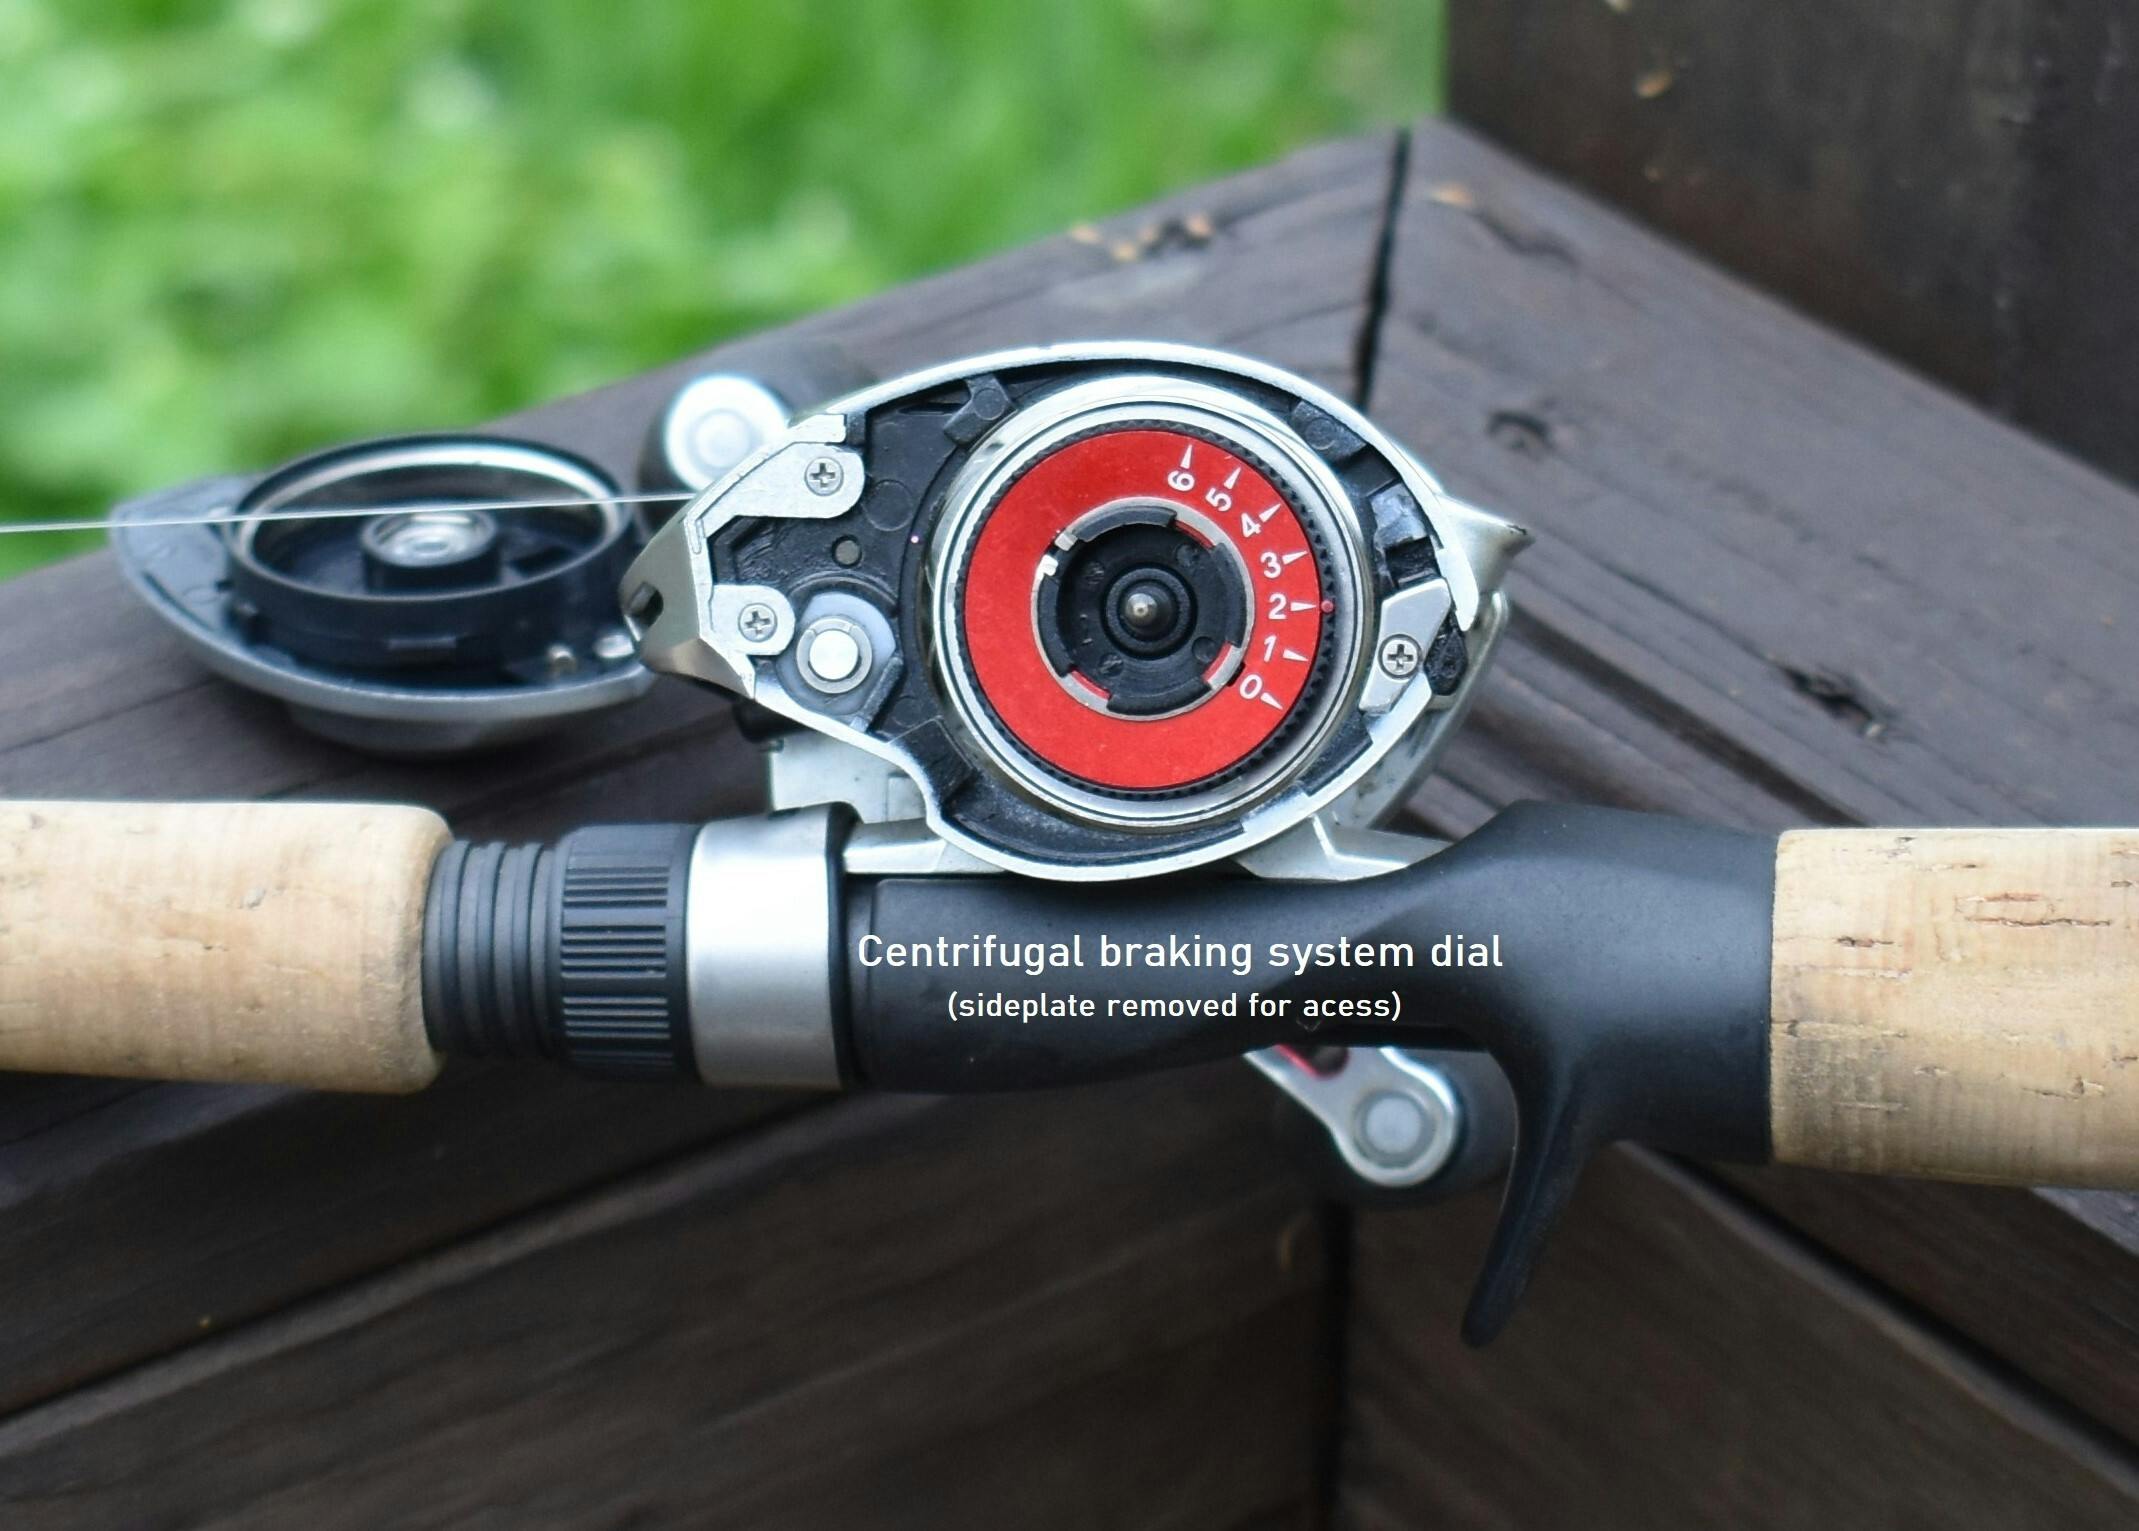 How To Spool A Baitcaster: A Beginner's First Steps